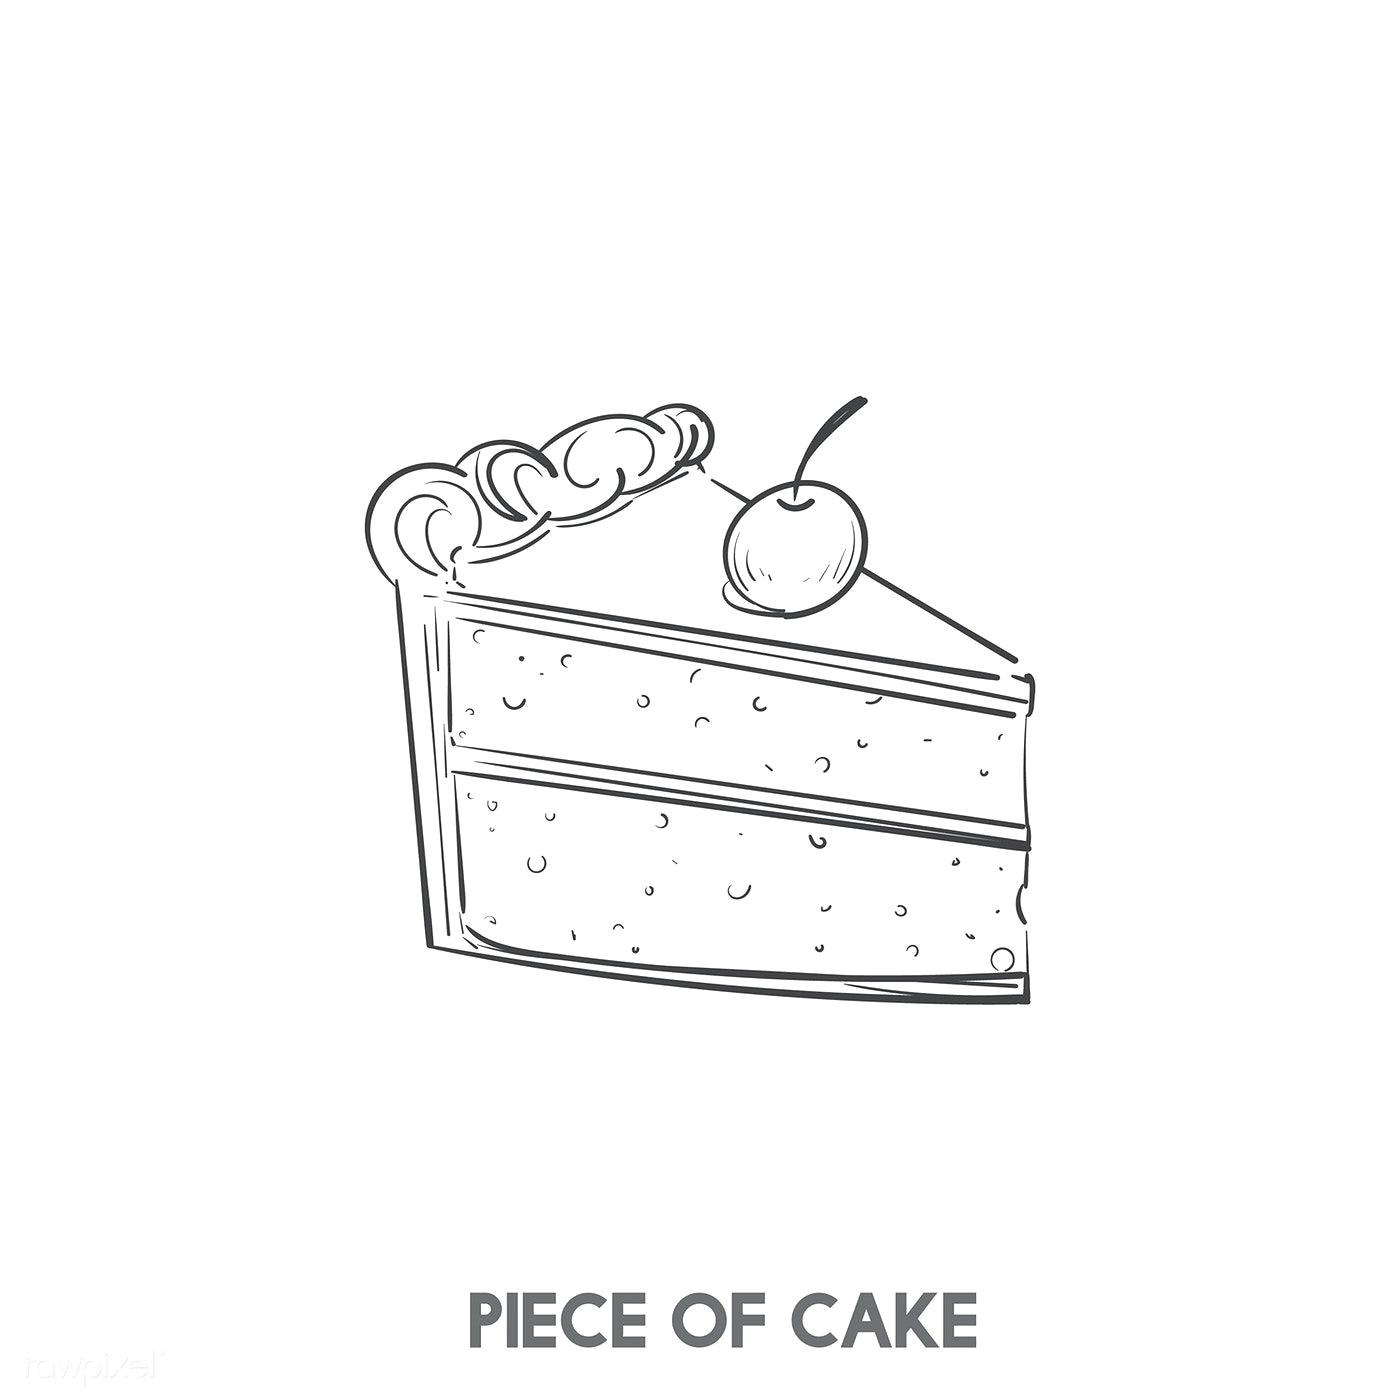 Easy Dessert Drawings Download Premium Vector Of A Piece Of Cake 402757 Cake